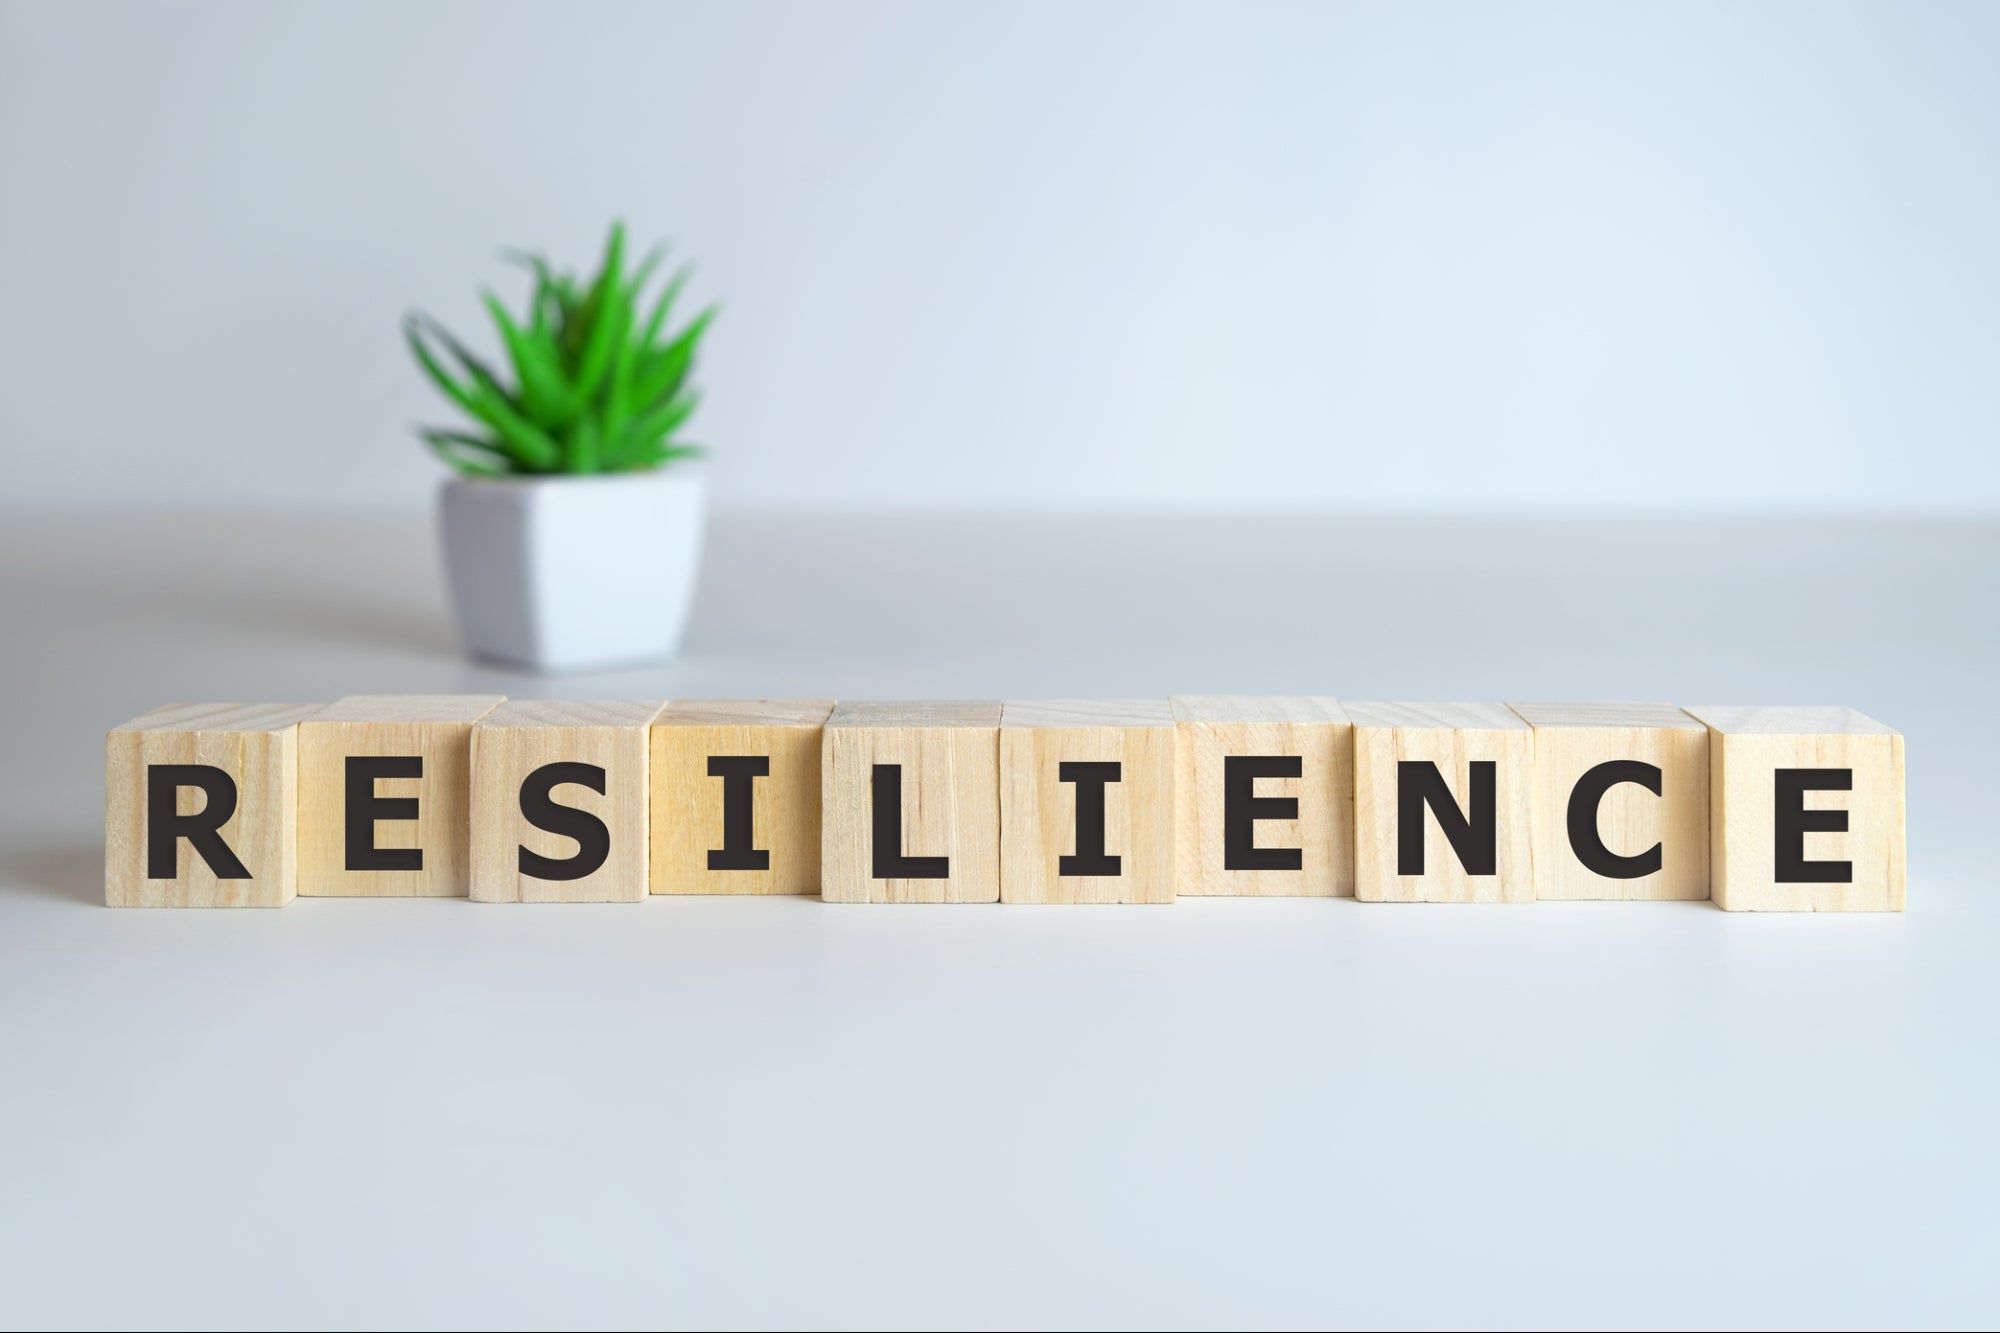 Why is resilience important in entrepreneurship particularly in starting a business?